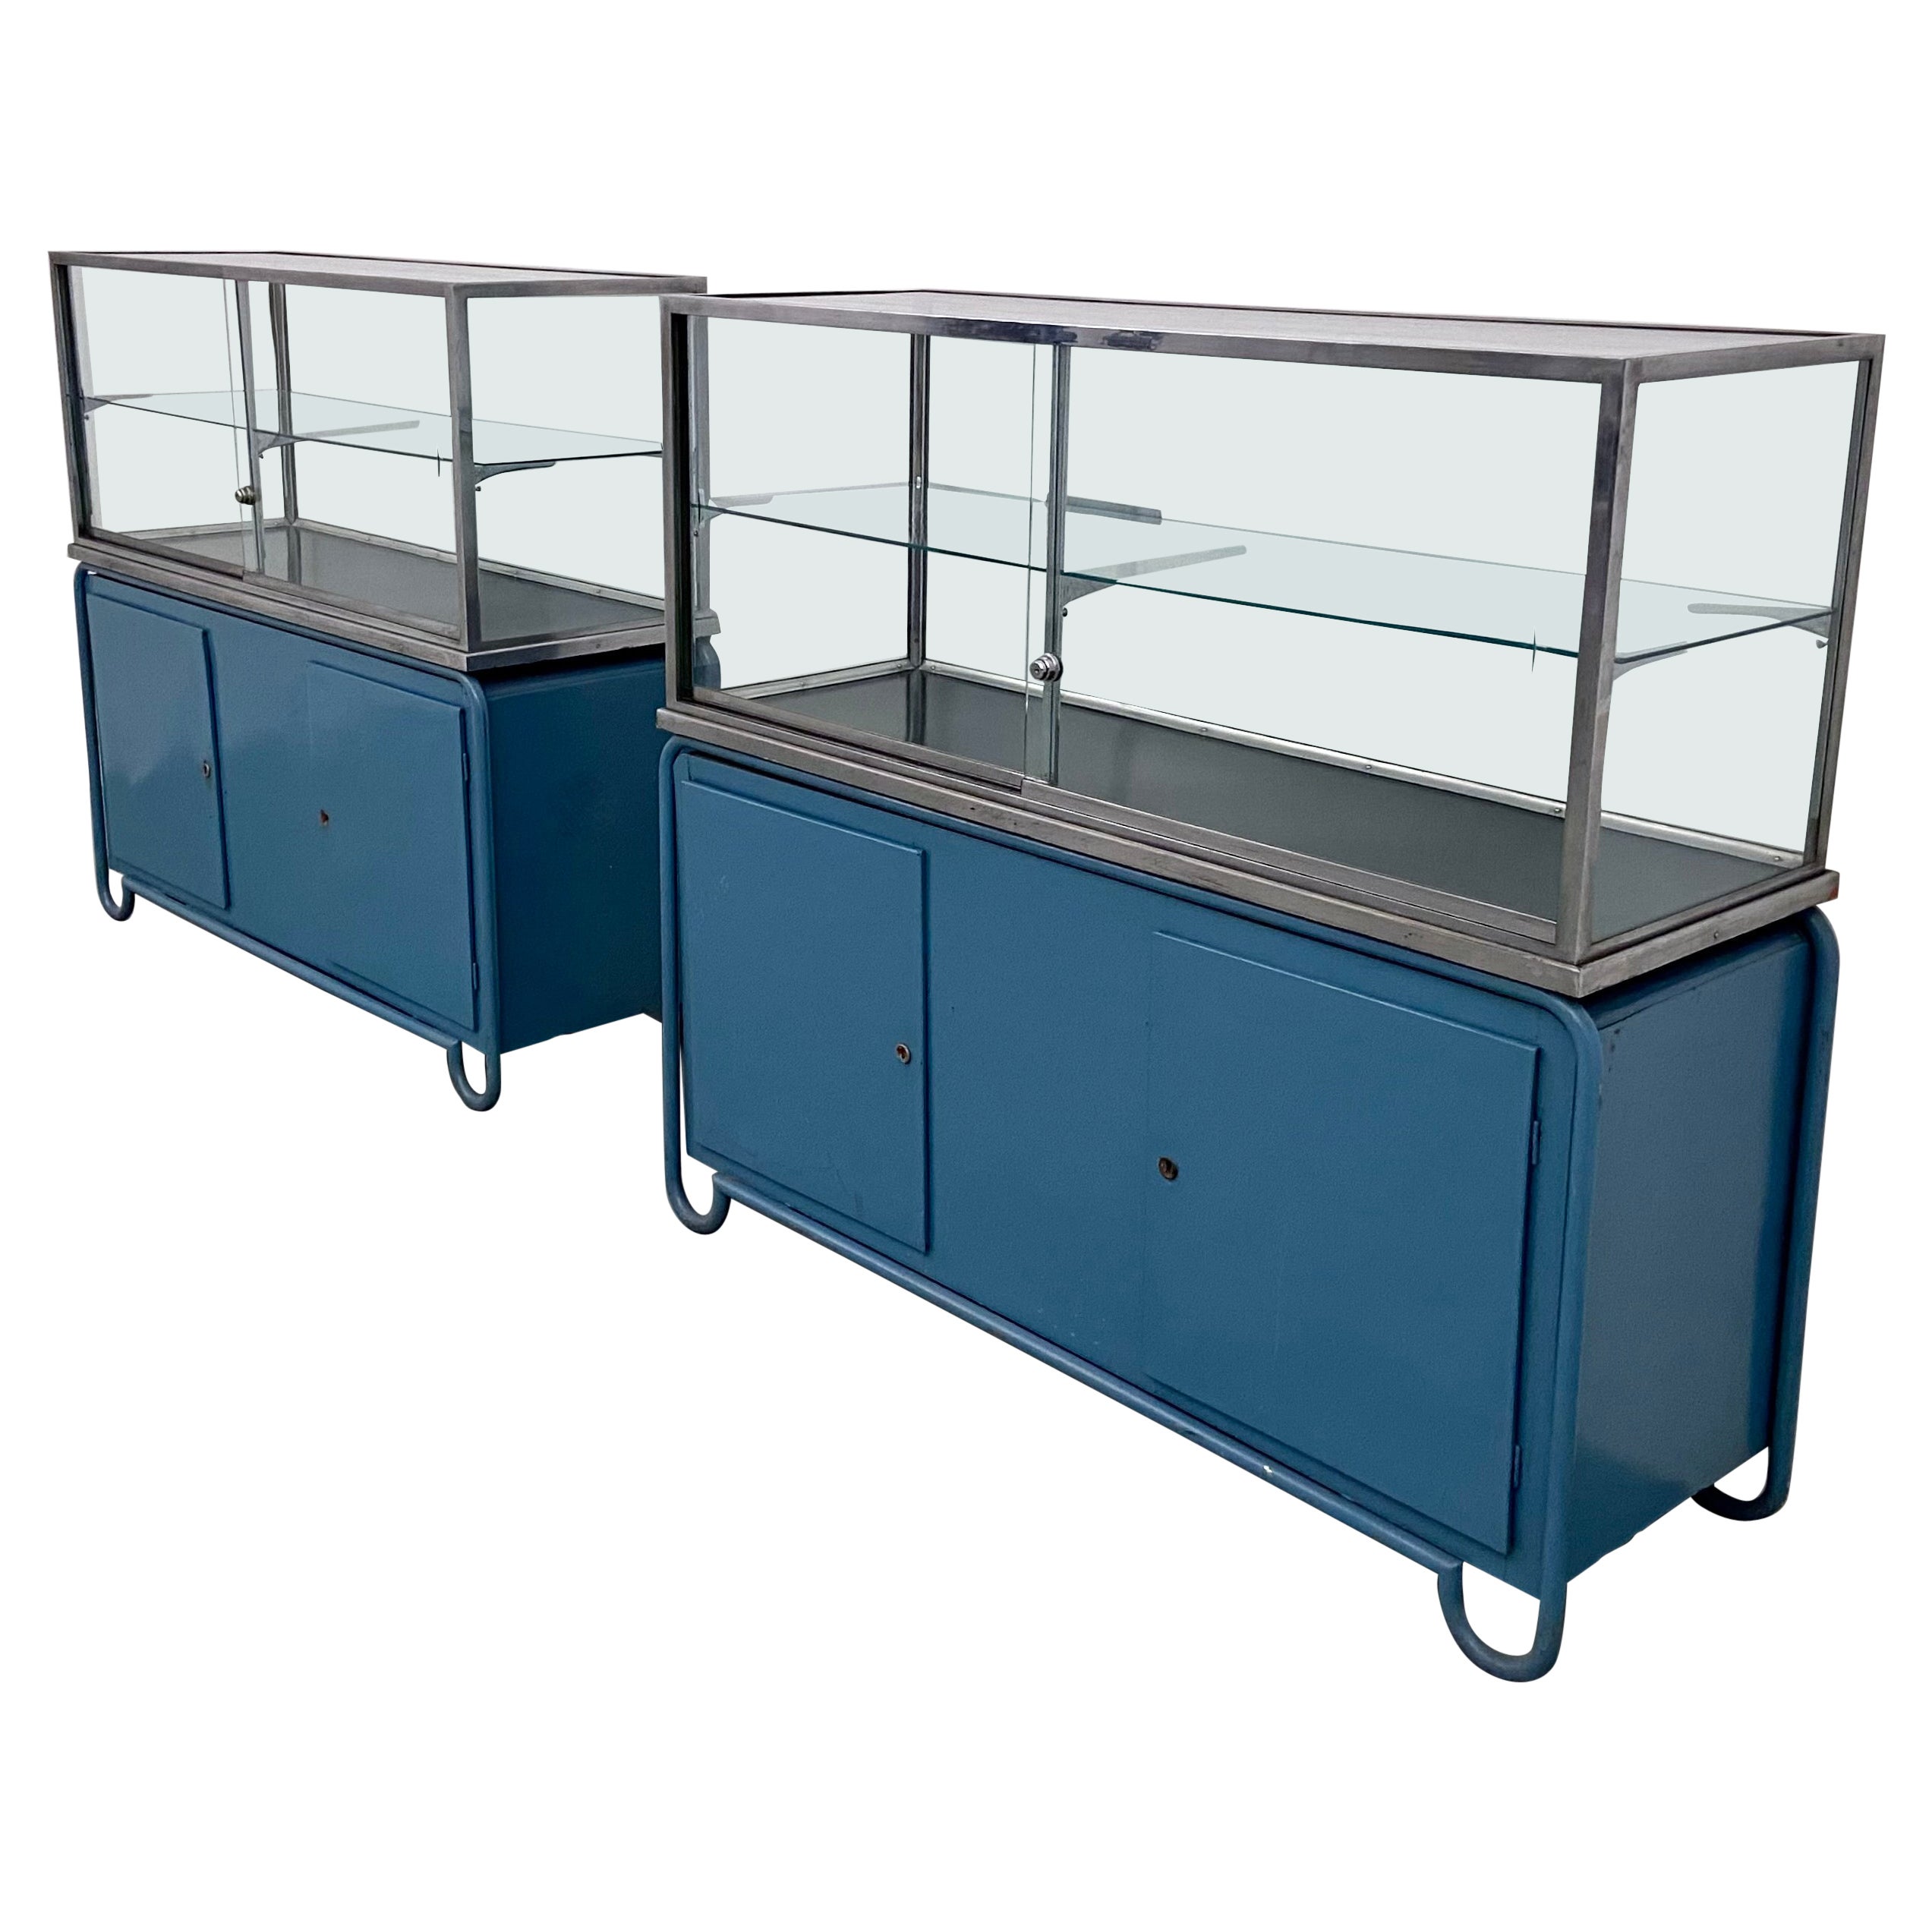 Set of 2 'Fiera Milano' Display Cabinets in Glass, Steel and Wood, Italy, 1950s For Sale